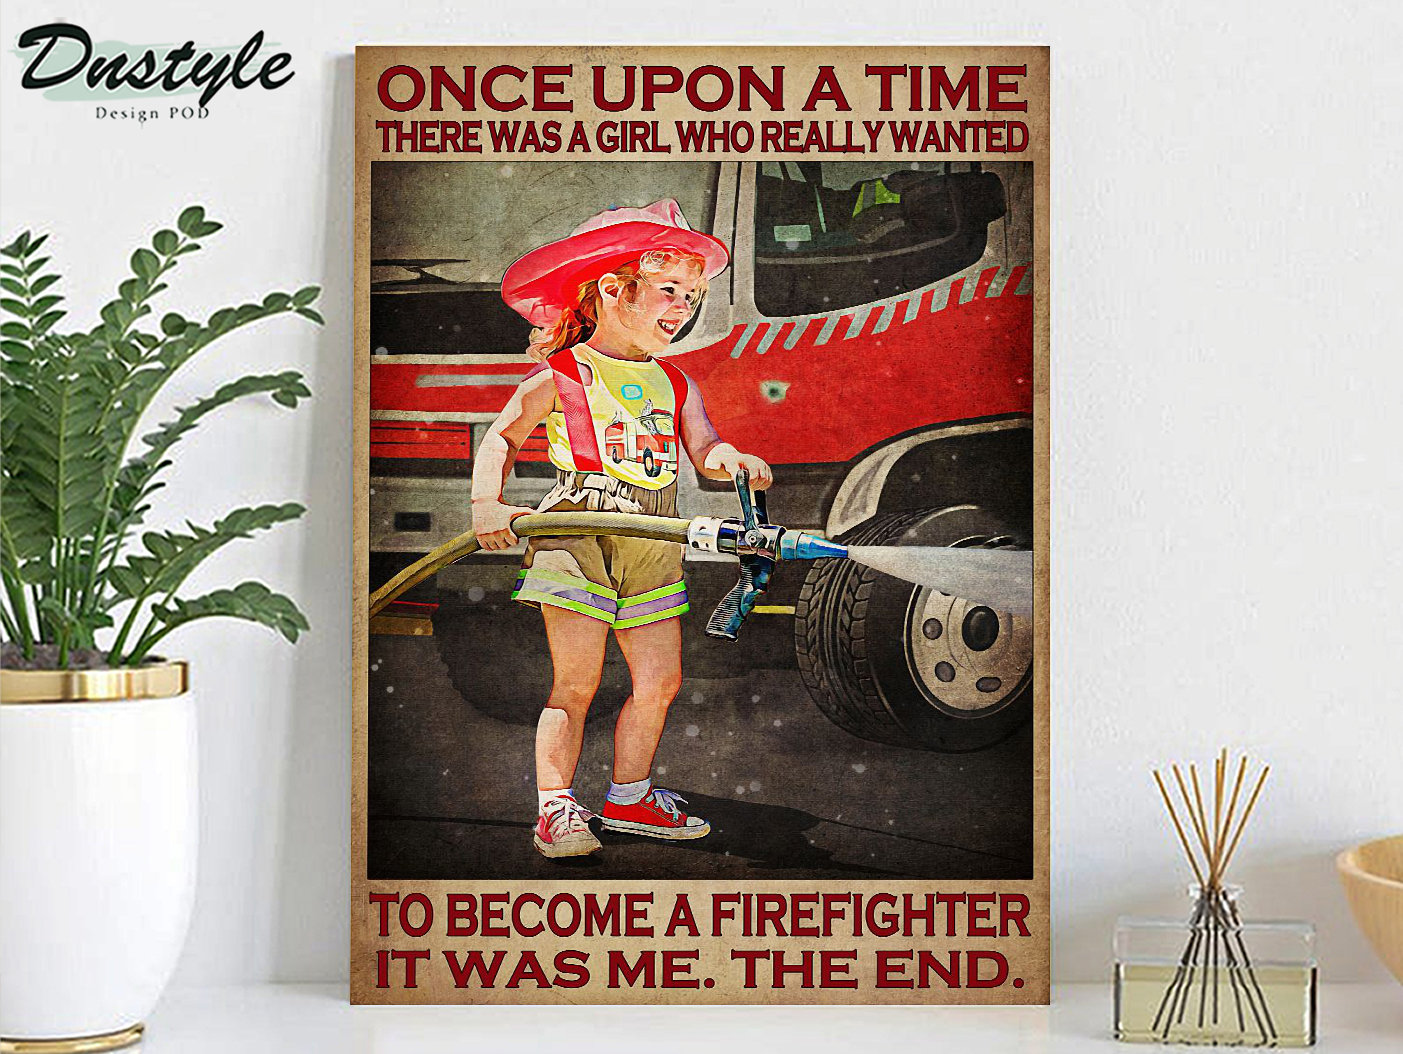 Once upon a time there was a girl who really wanted to become a firefighter poster